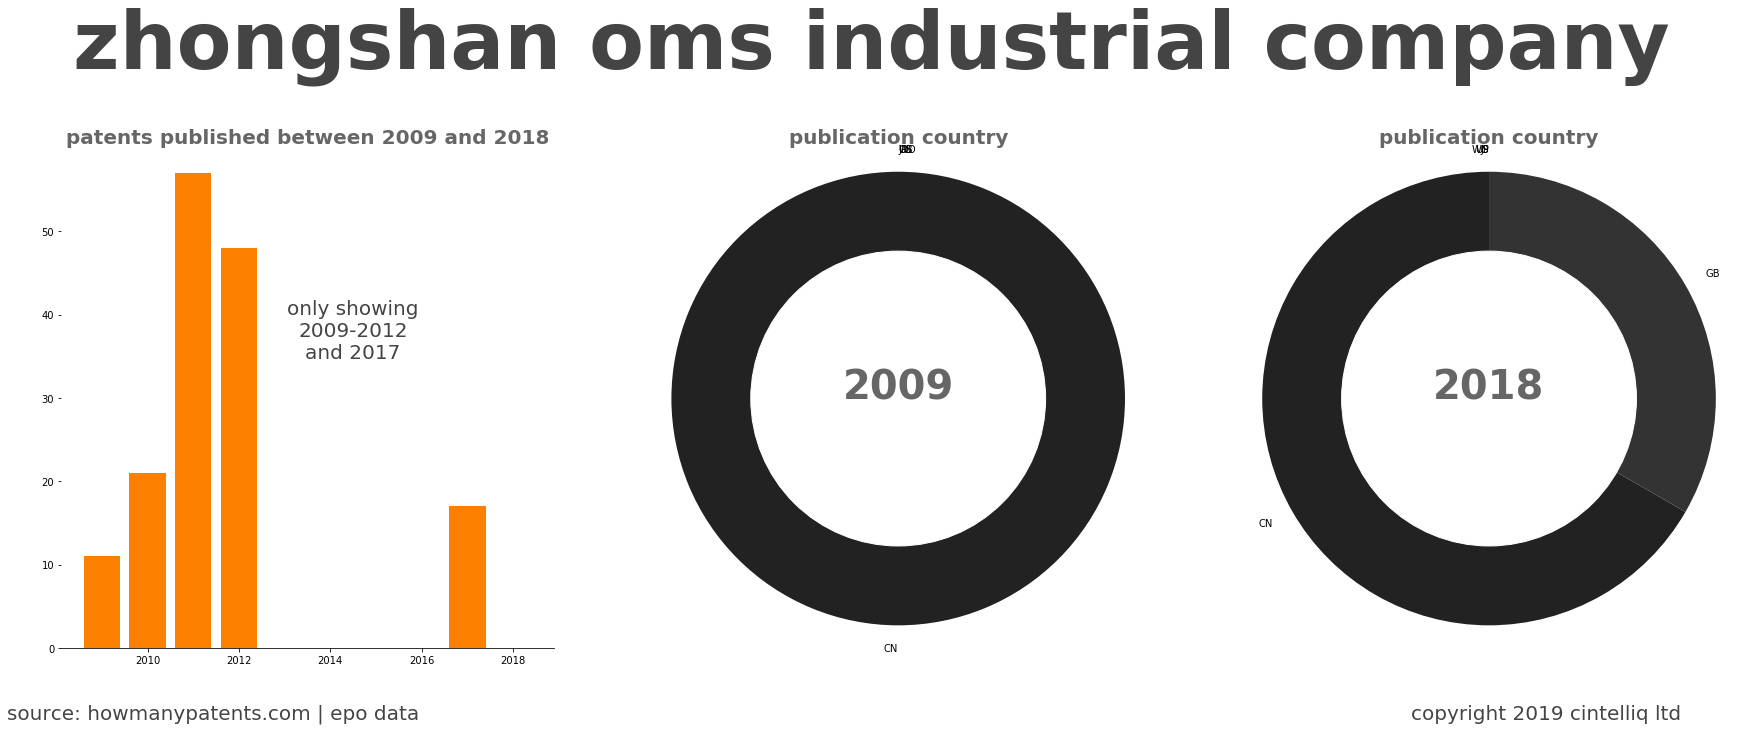 summary of patents for Zhongshan Oms Industrial Company